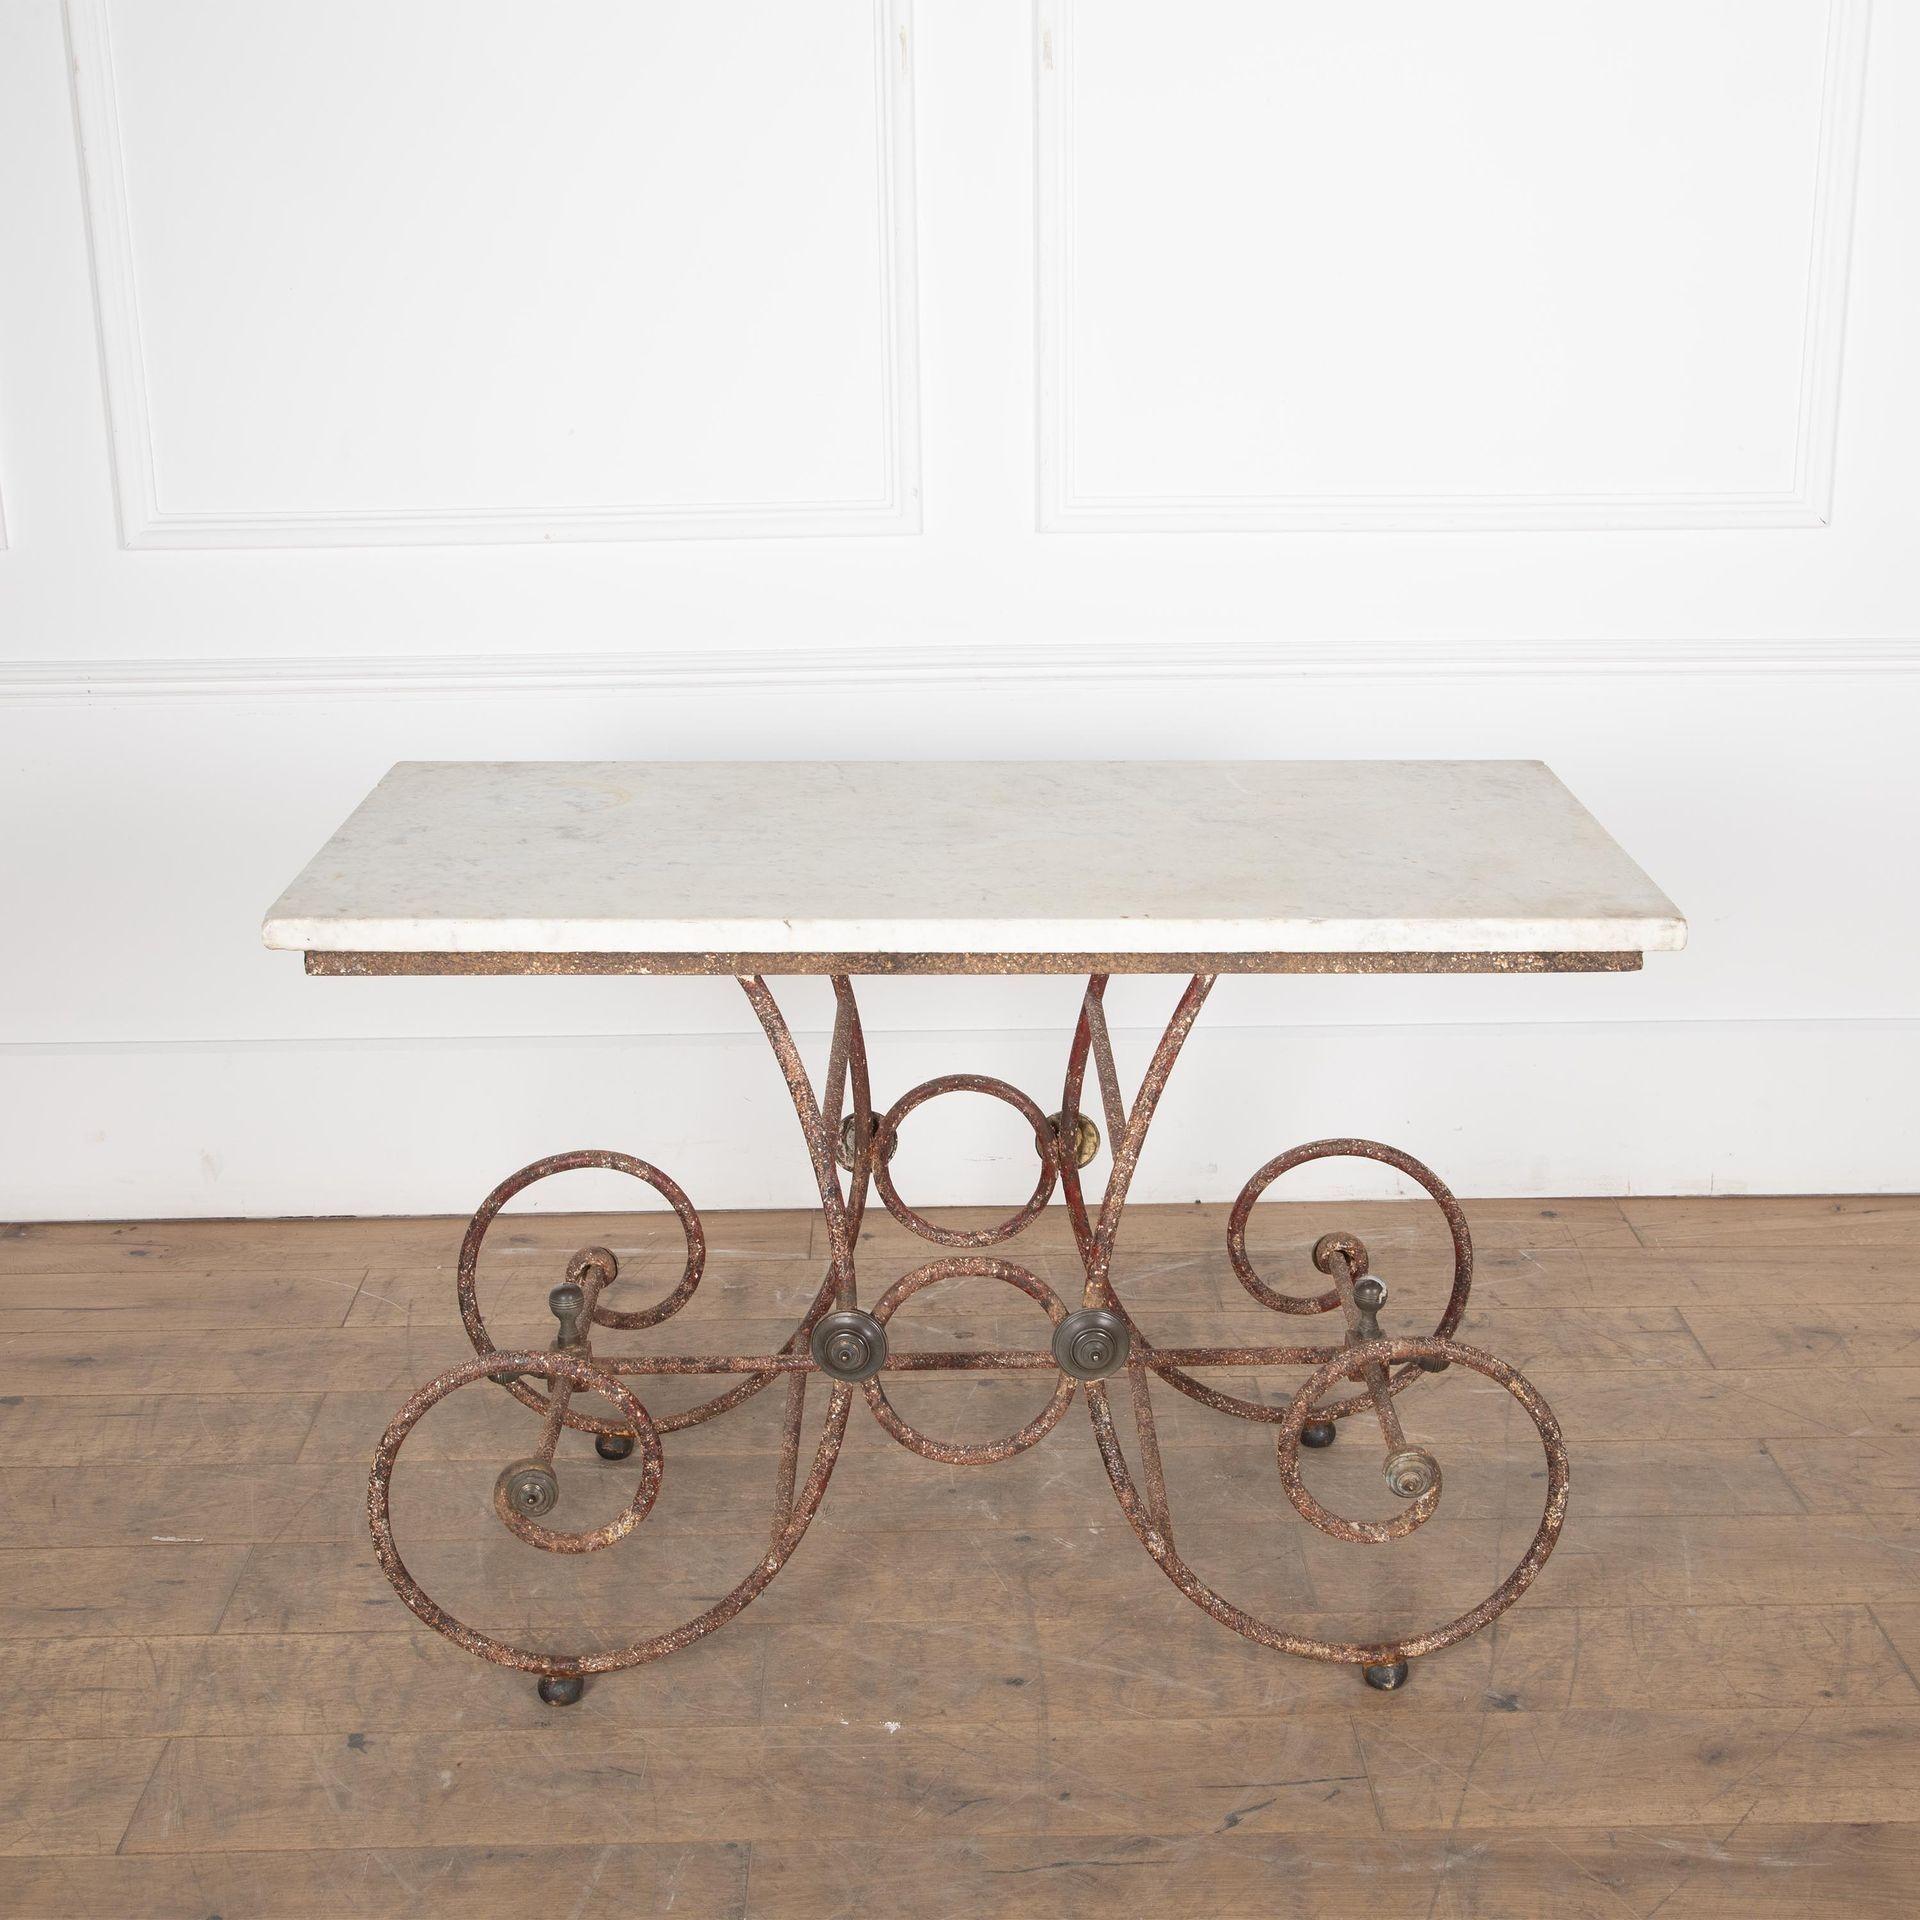 Elegant 19th Century French patisserie table.

Beautiful original marble top sitting on scrolling wrought iron base with brass roundels.

Pâtisserie tables were designed to go in the shop window and display edible goods.

Therefore, a beautiful